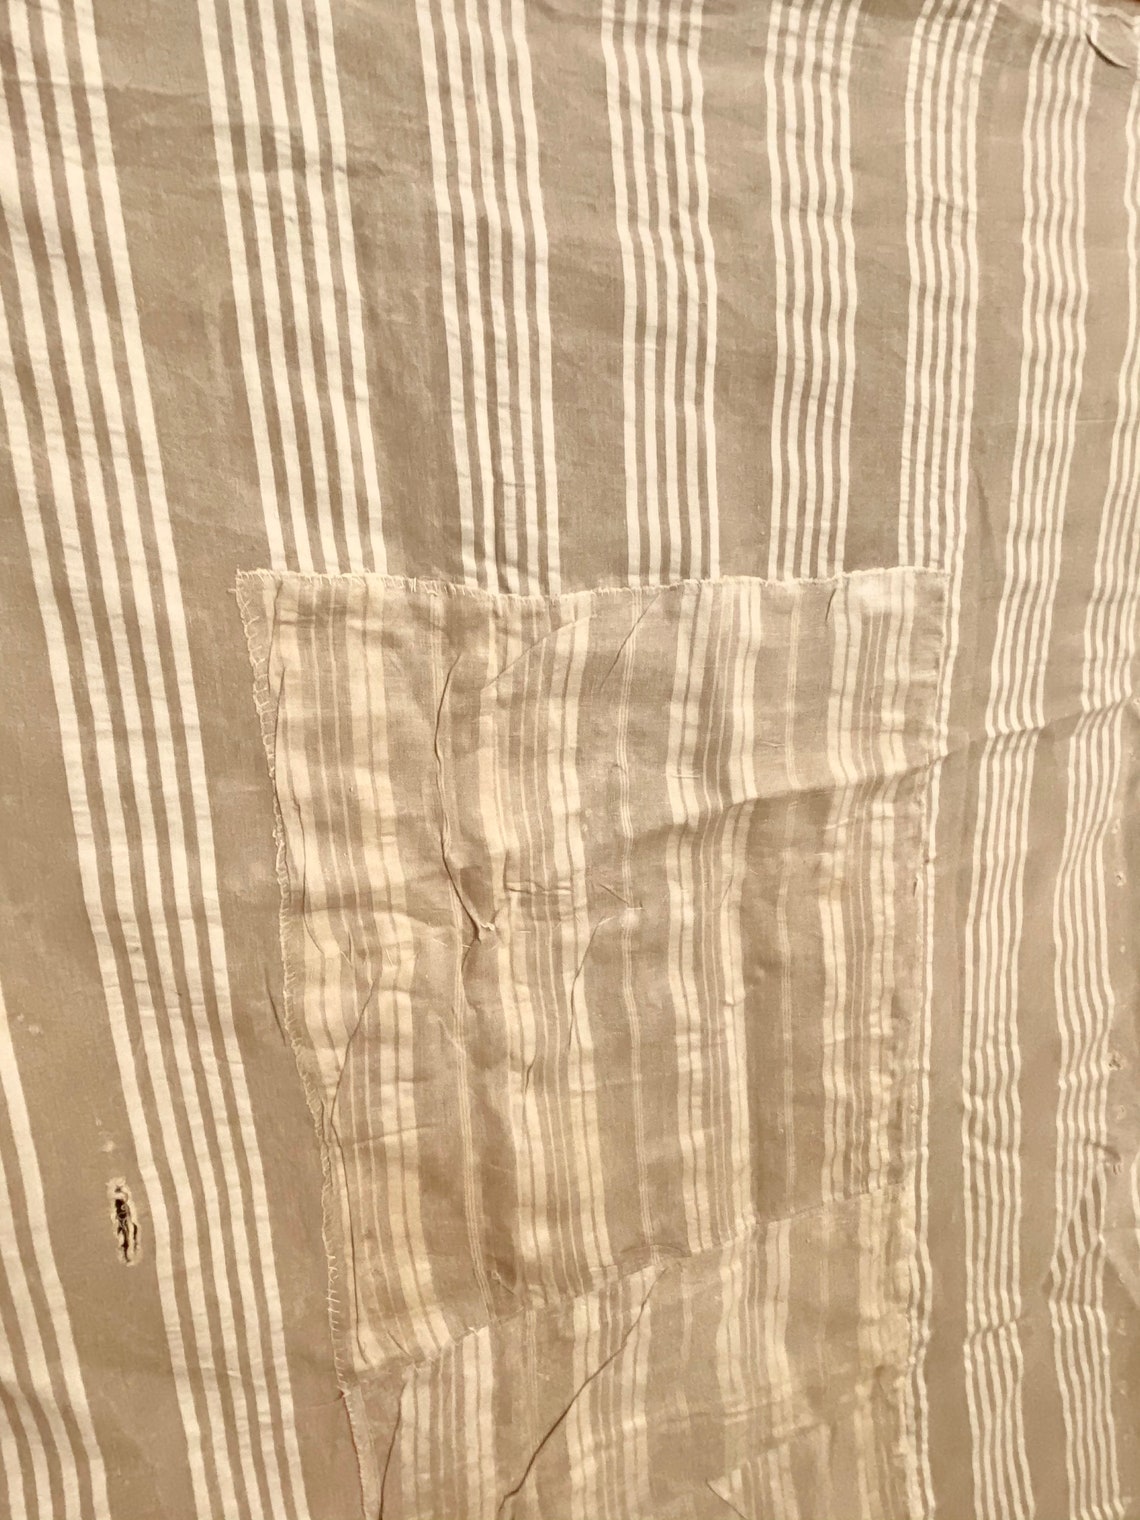 Incredible early 1800's French antique ticking stripe | Etsy